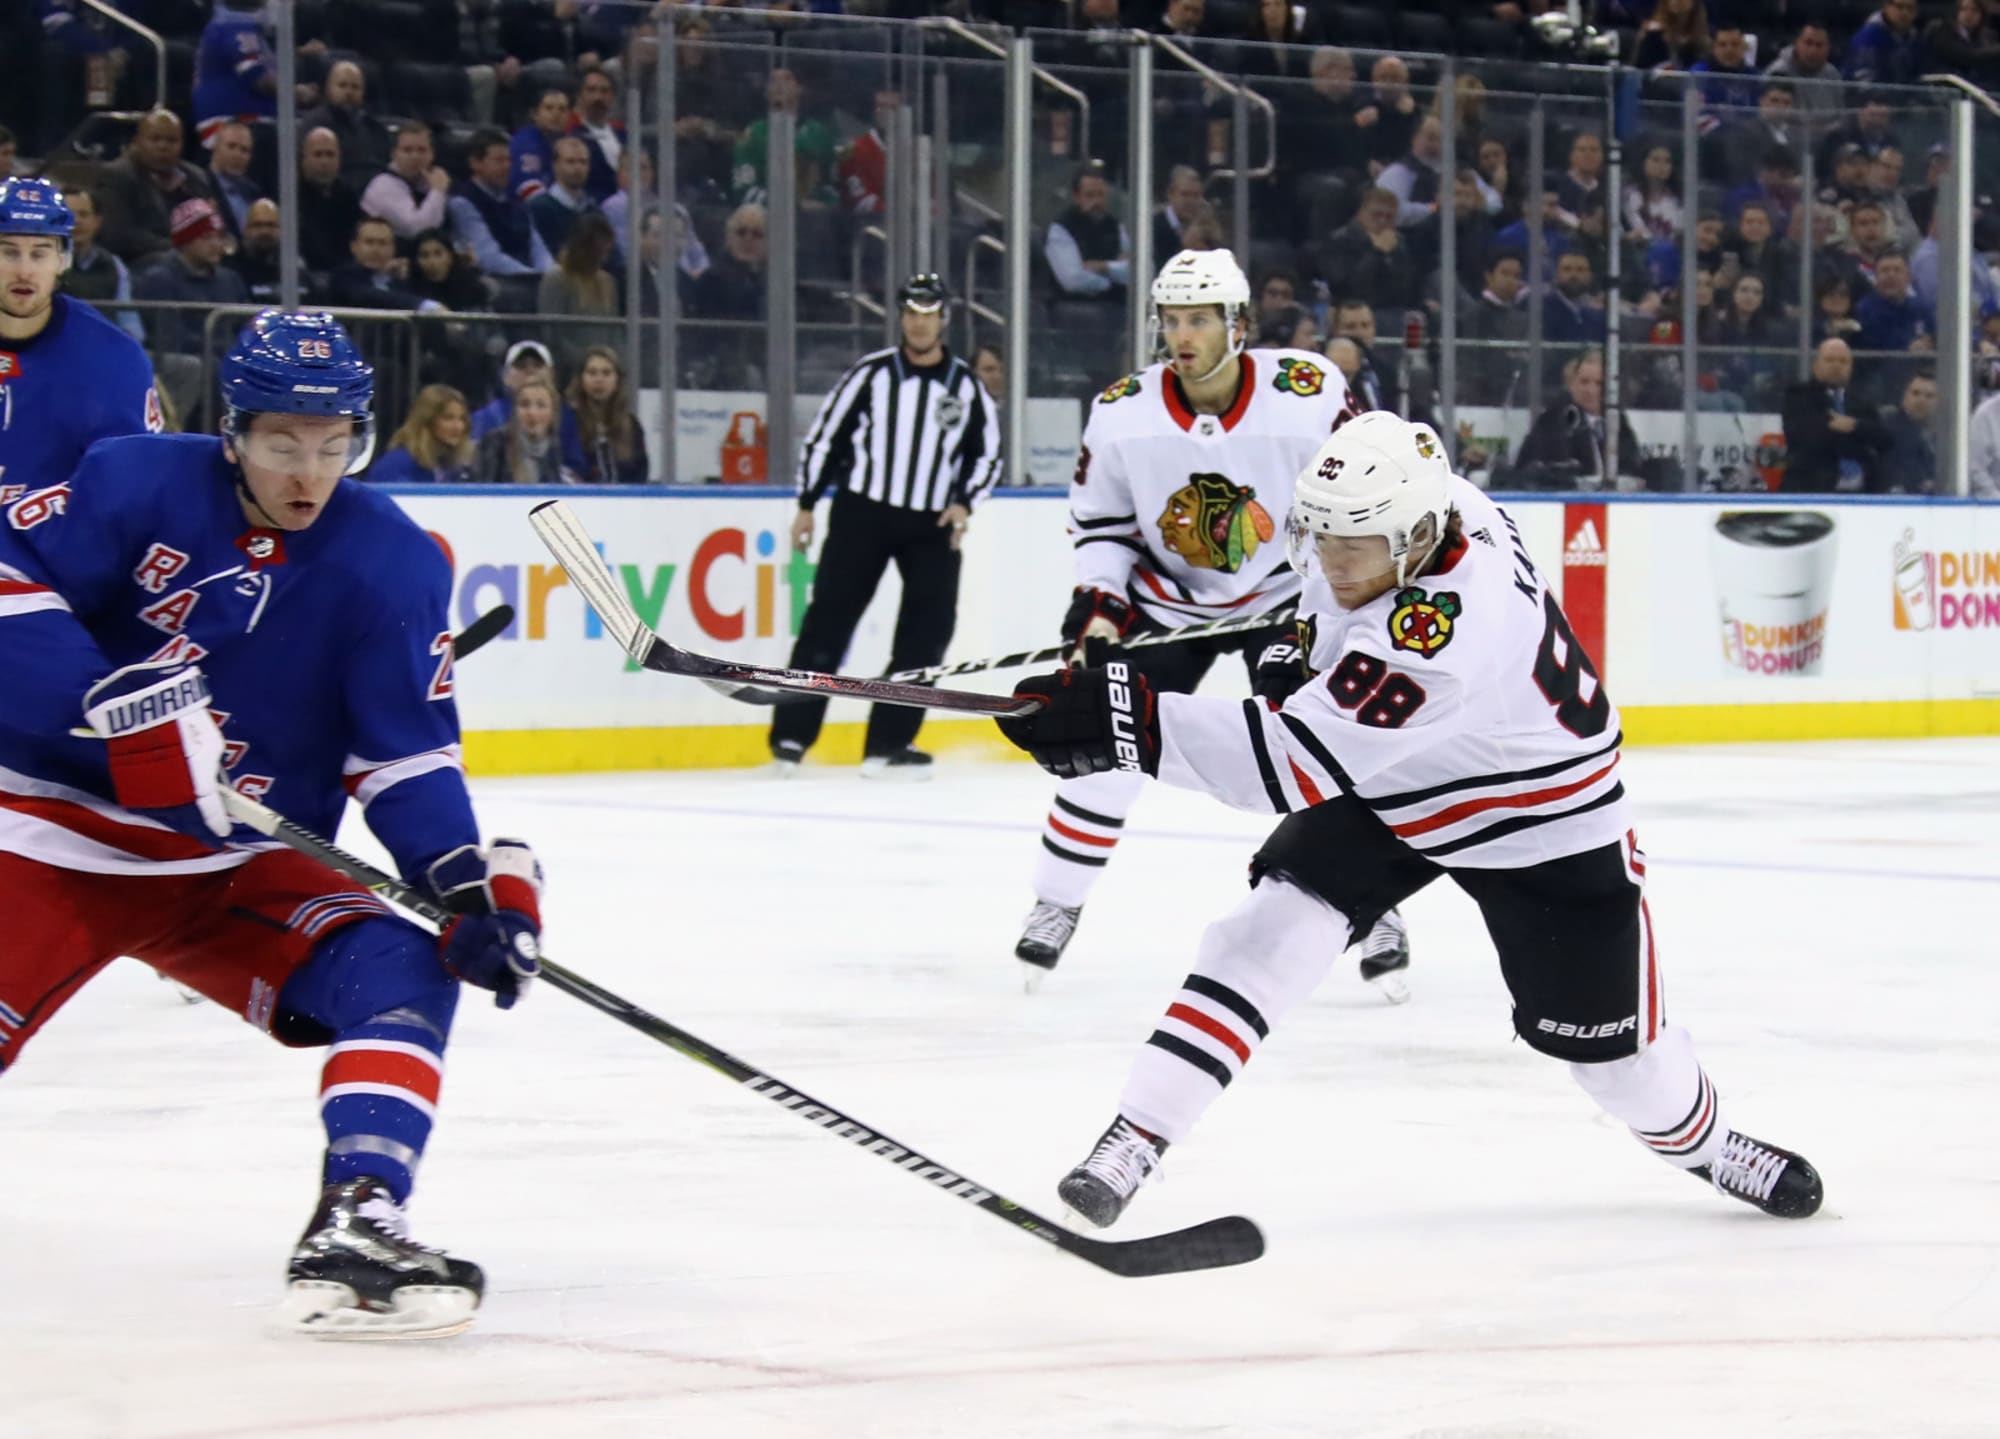 Patrick Kane “Not the Happiest” After New York Rangers Make Big